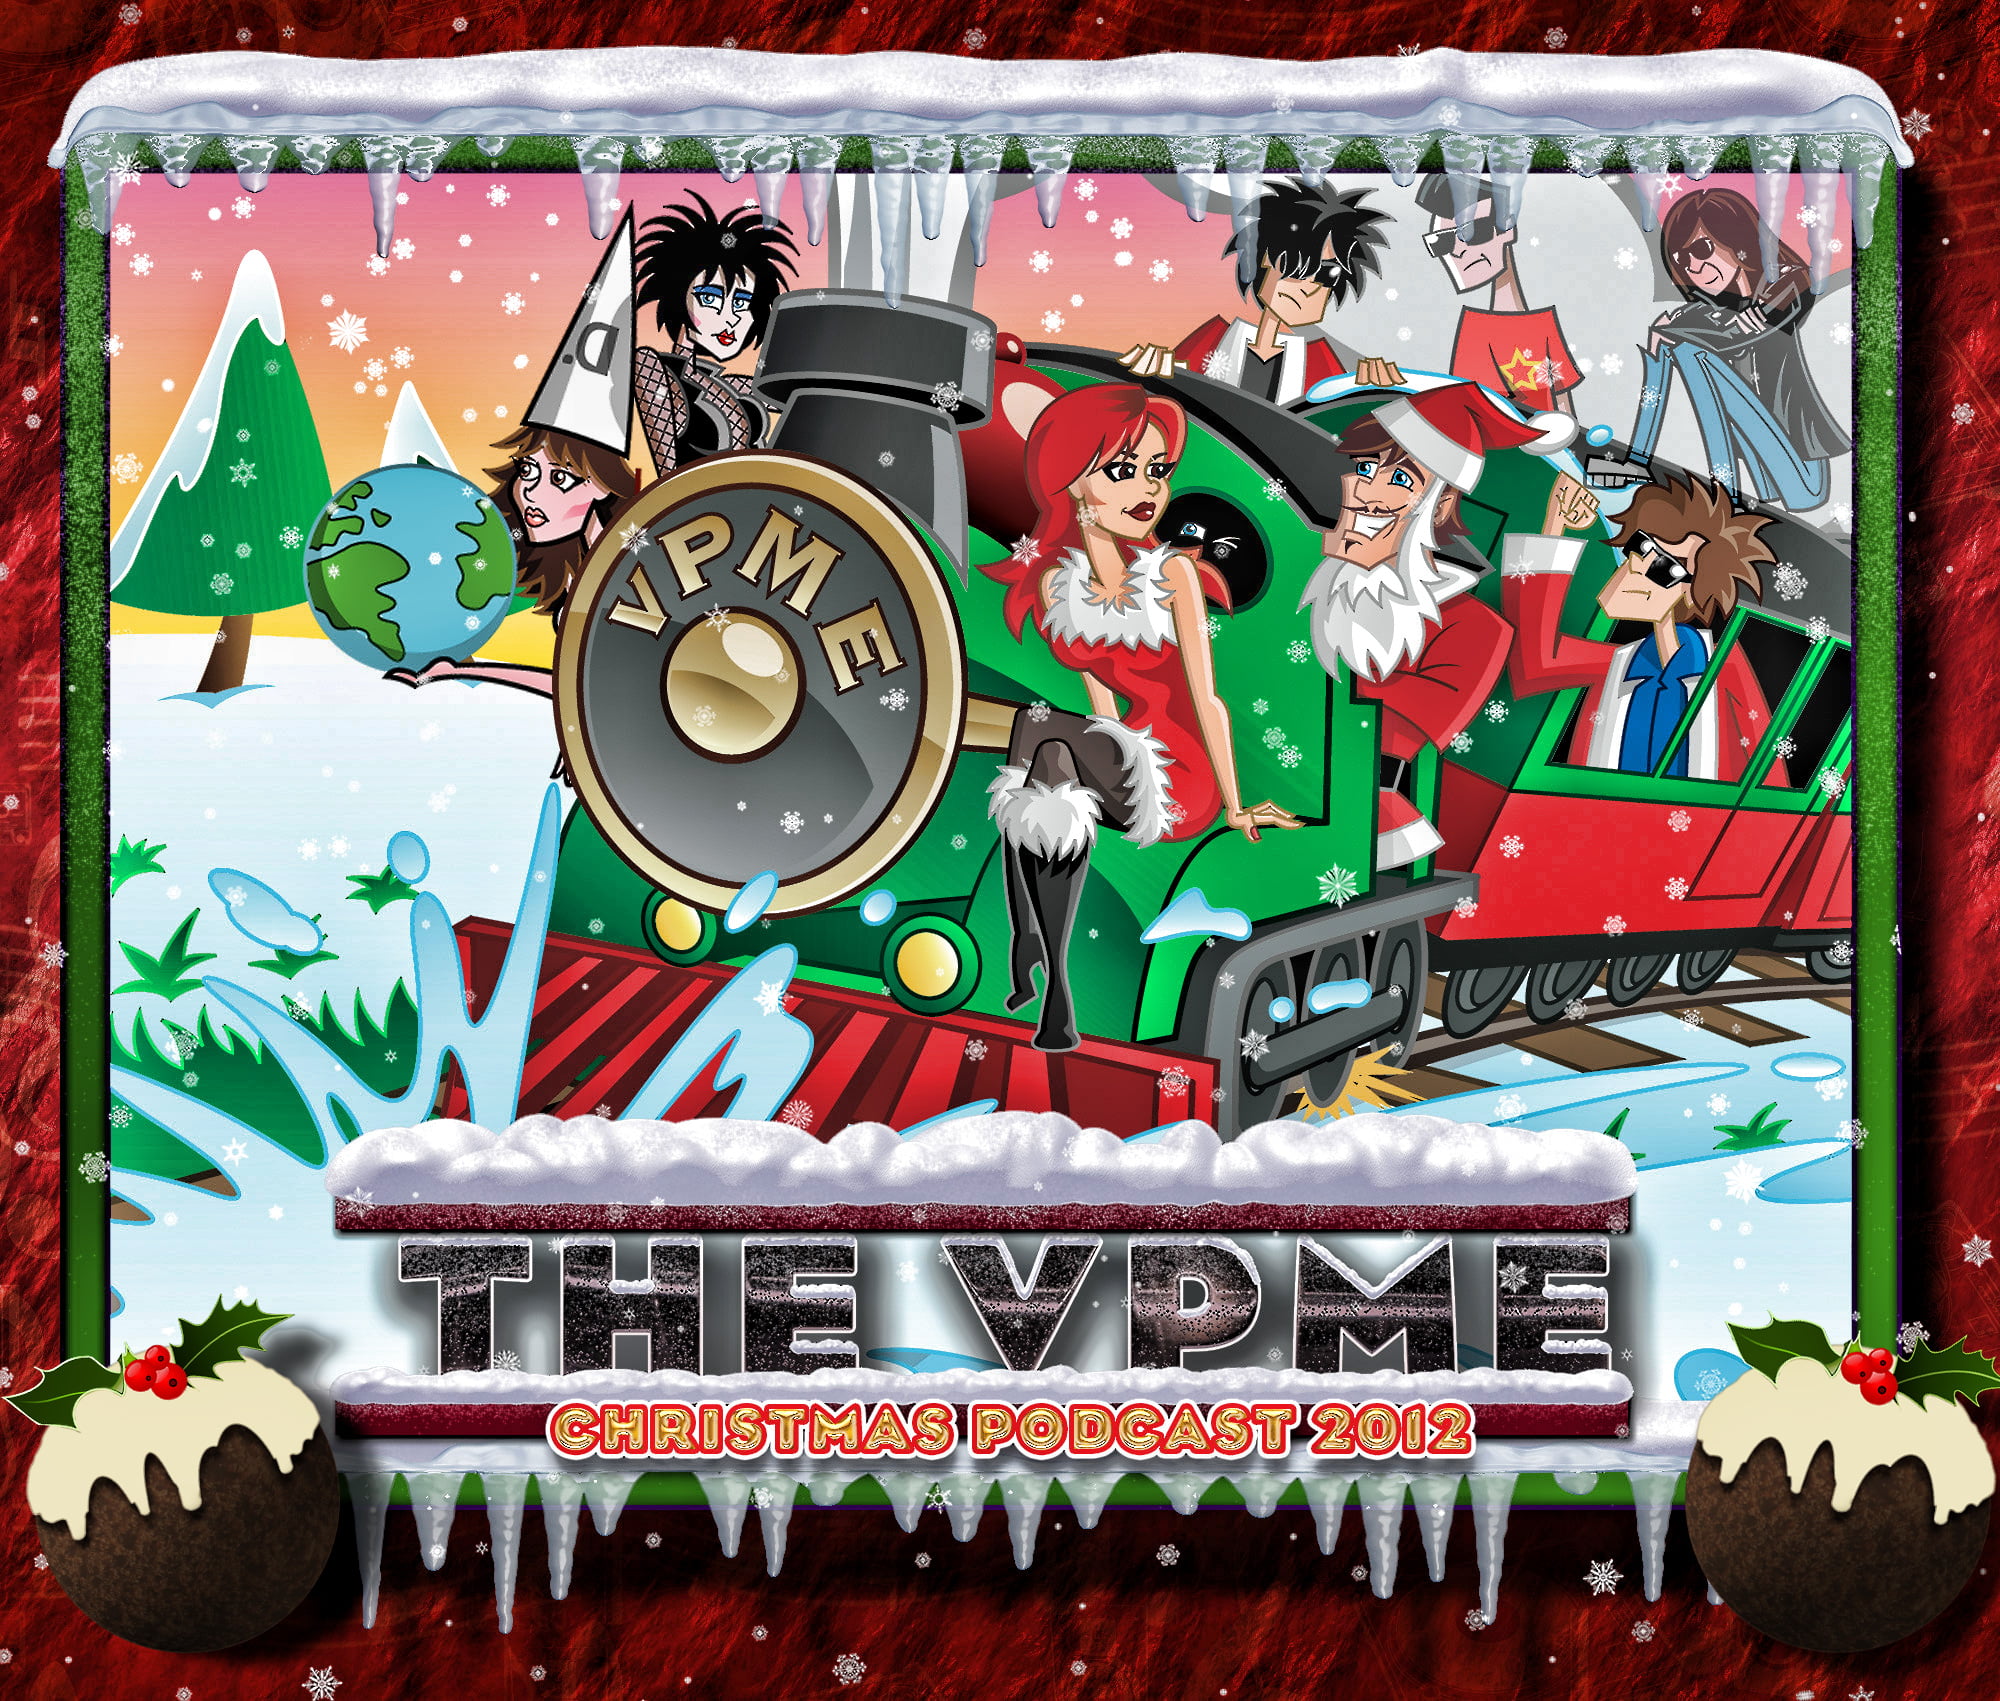 The VPME | The Von Pip Musical Express Christmas Podcast 2012